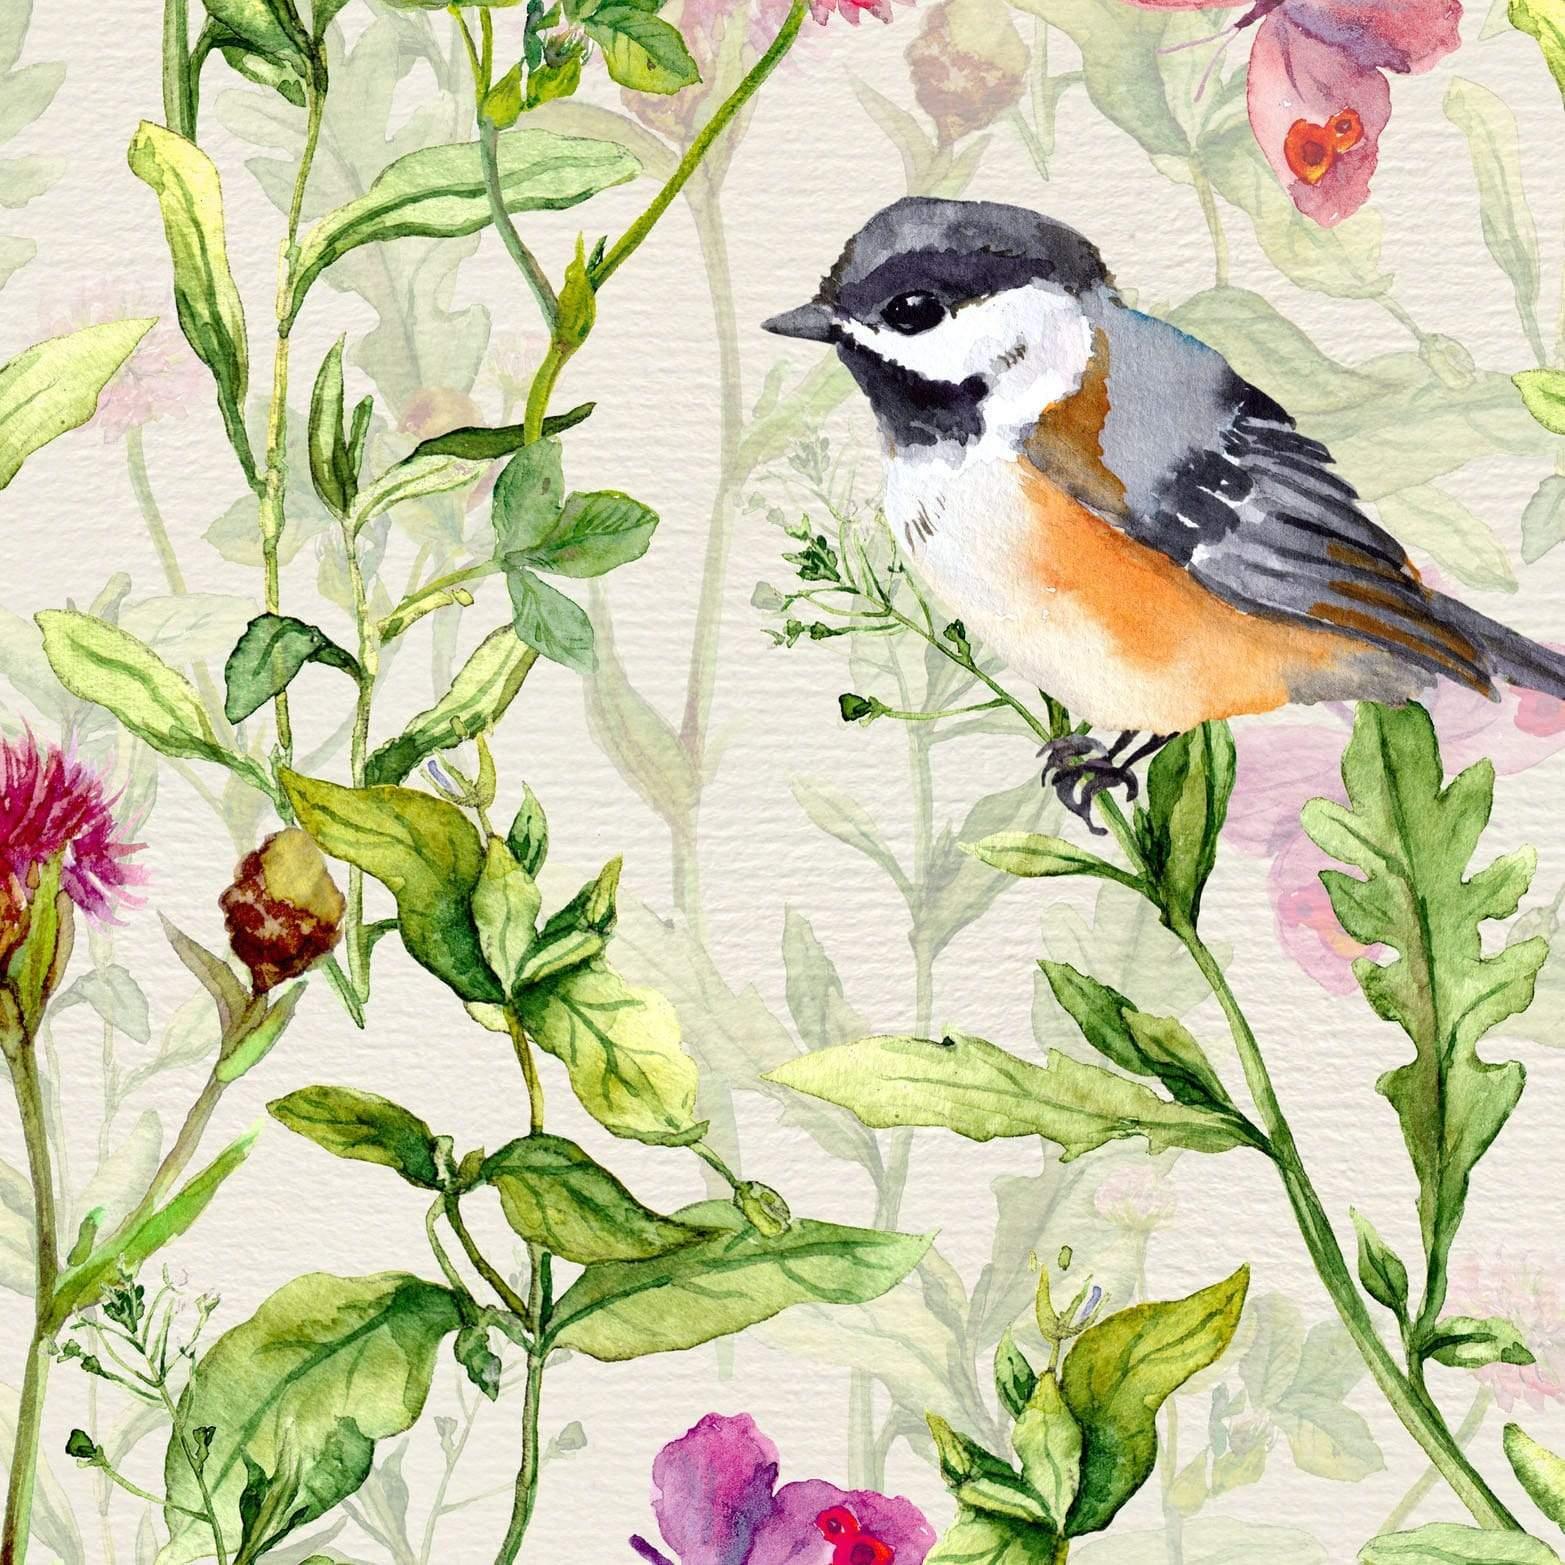 Small bird in a spring meadow Removable Wallpaper in 28" Rolls